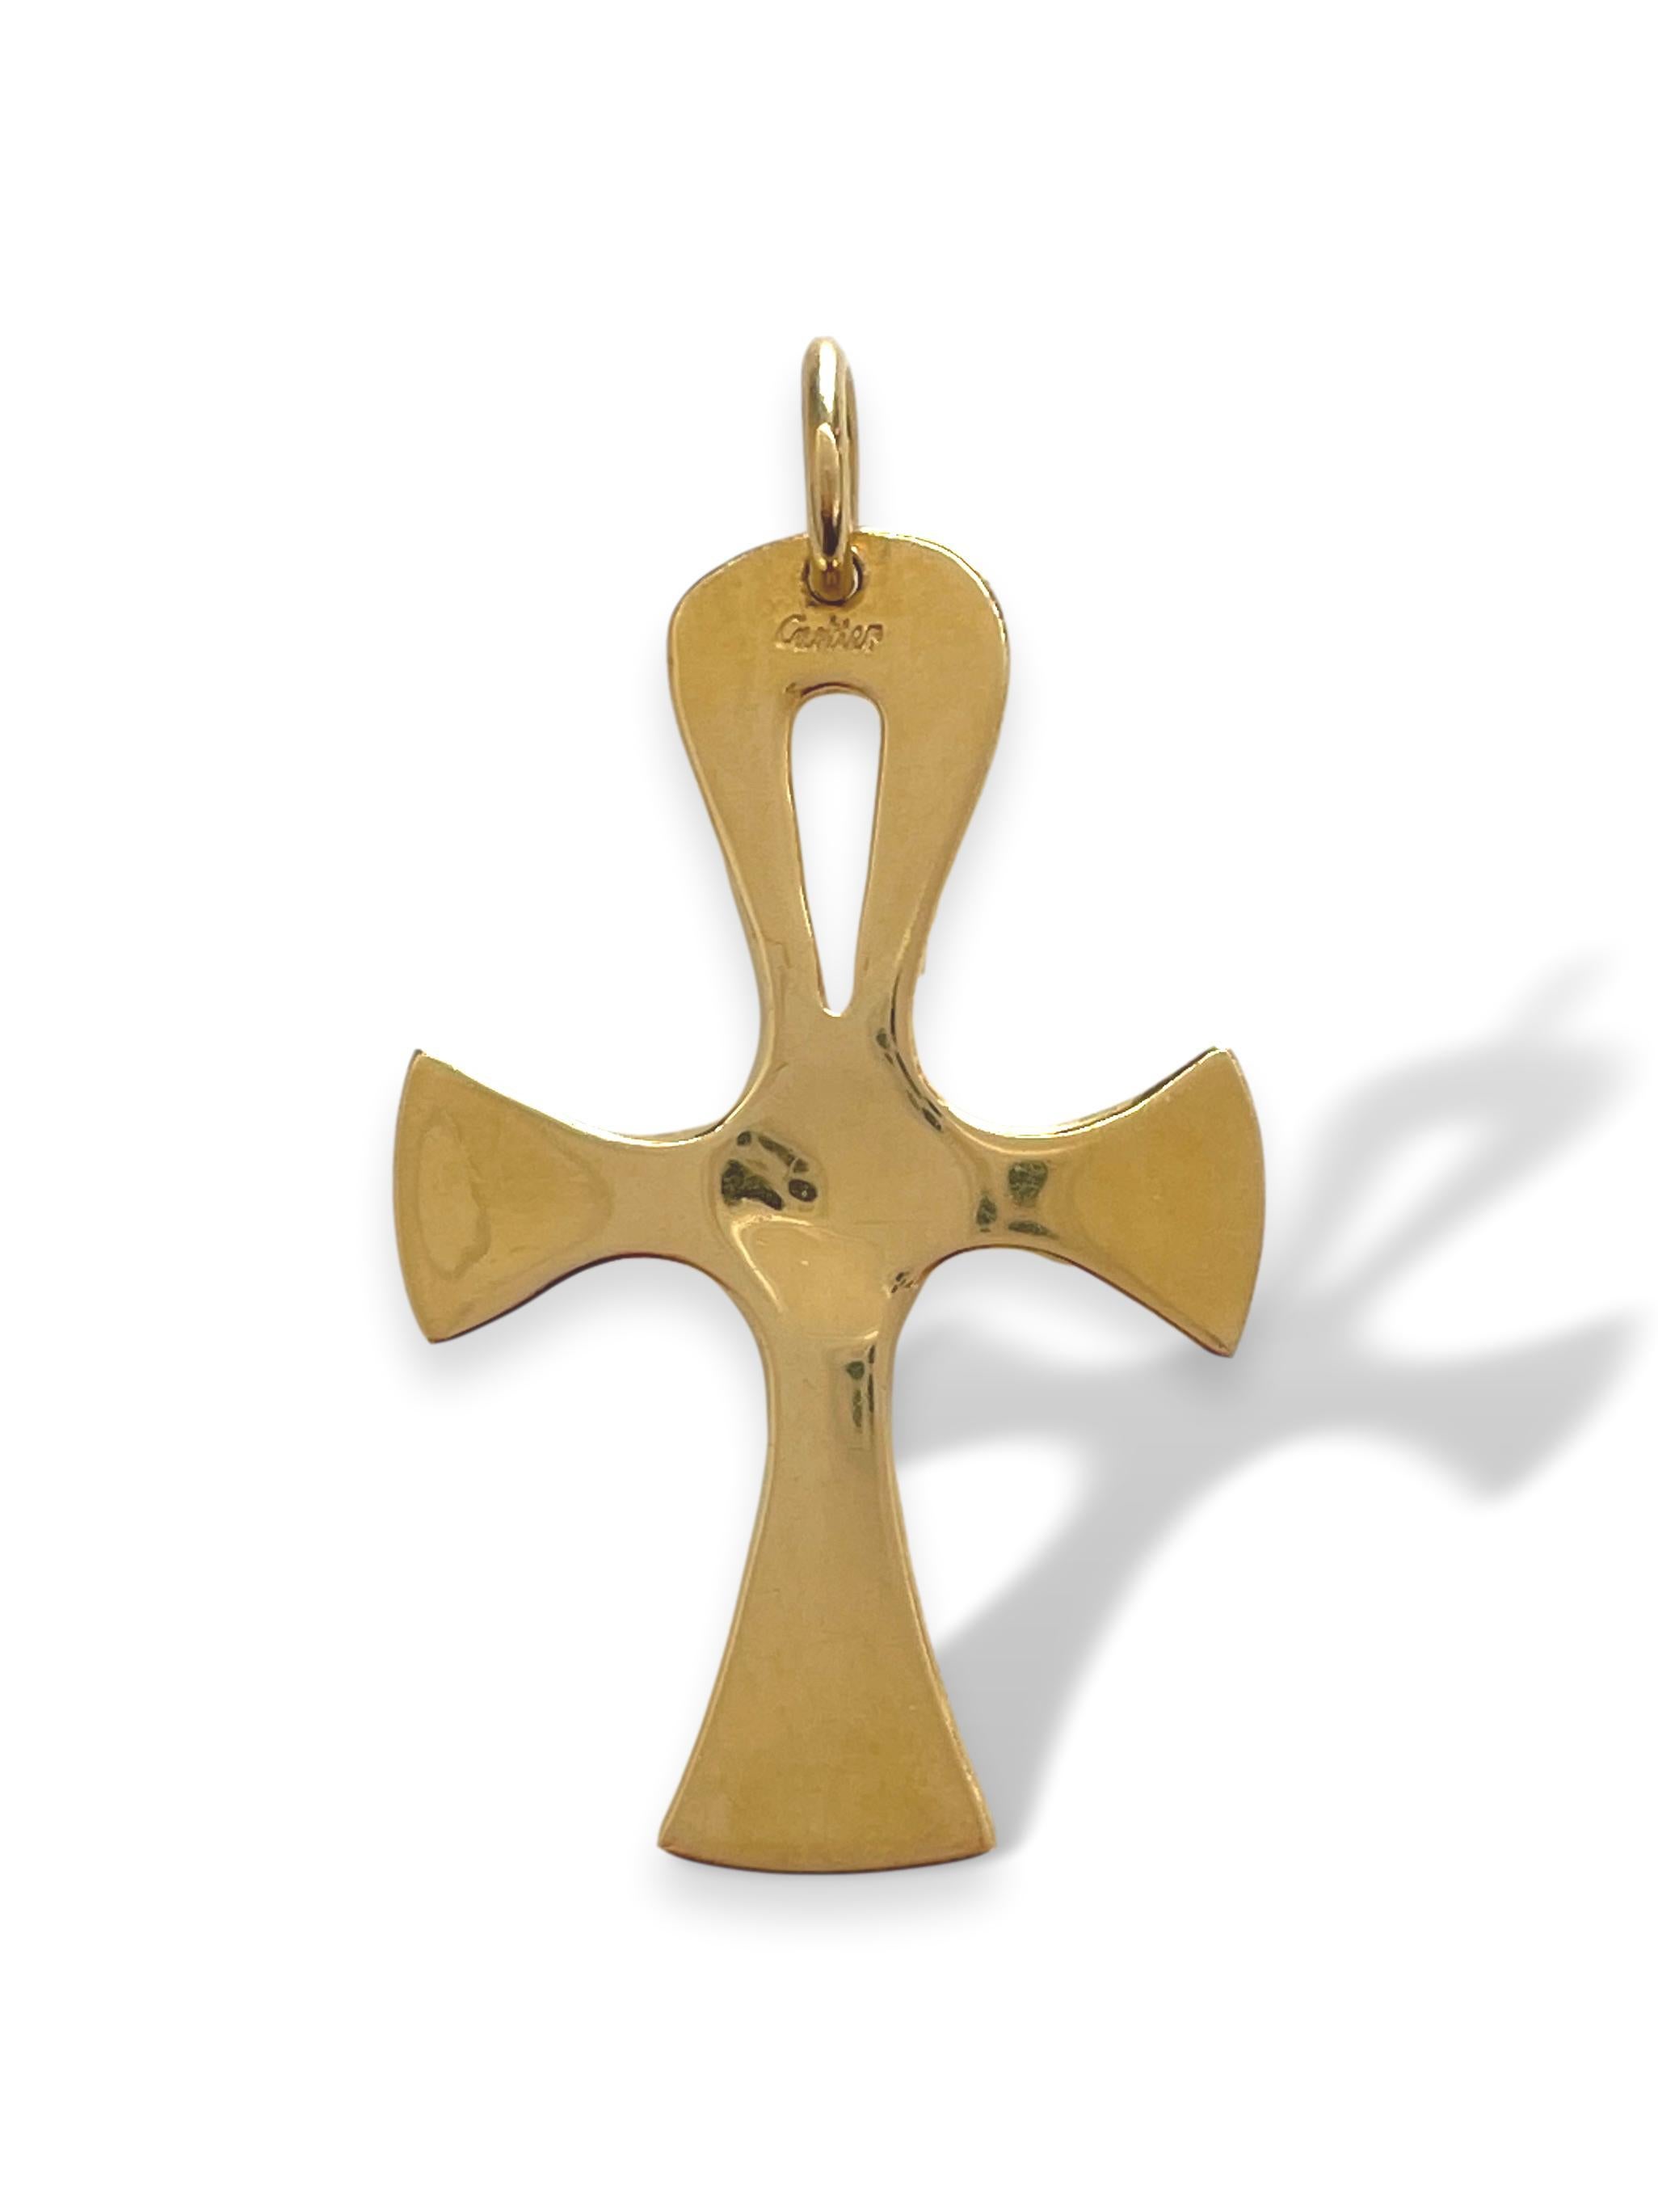 3/4 Inch x 1 1/4 Inch or Sterling Silver PicturesOnGold.com Large Ankh Cross in Solid 14K Yellow or White Gold 